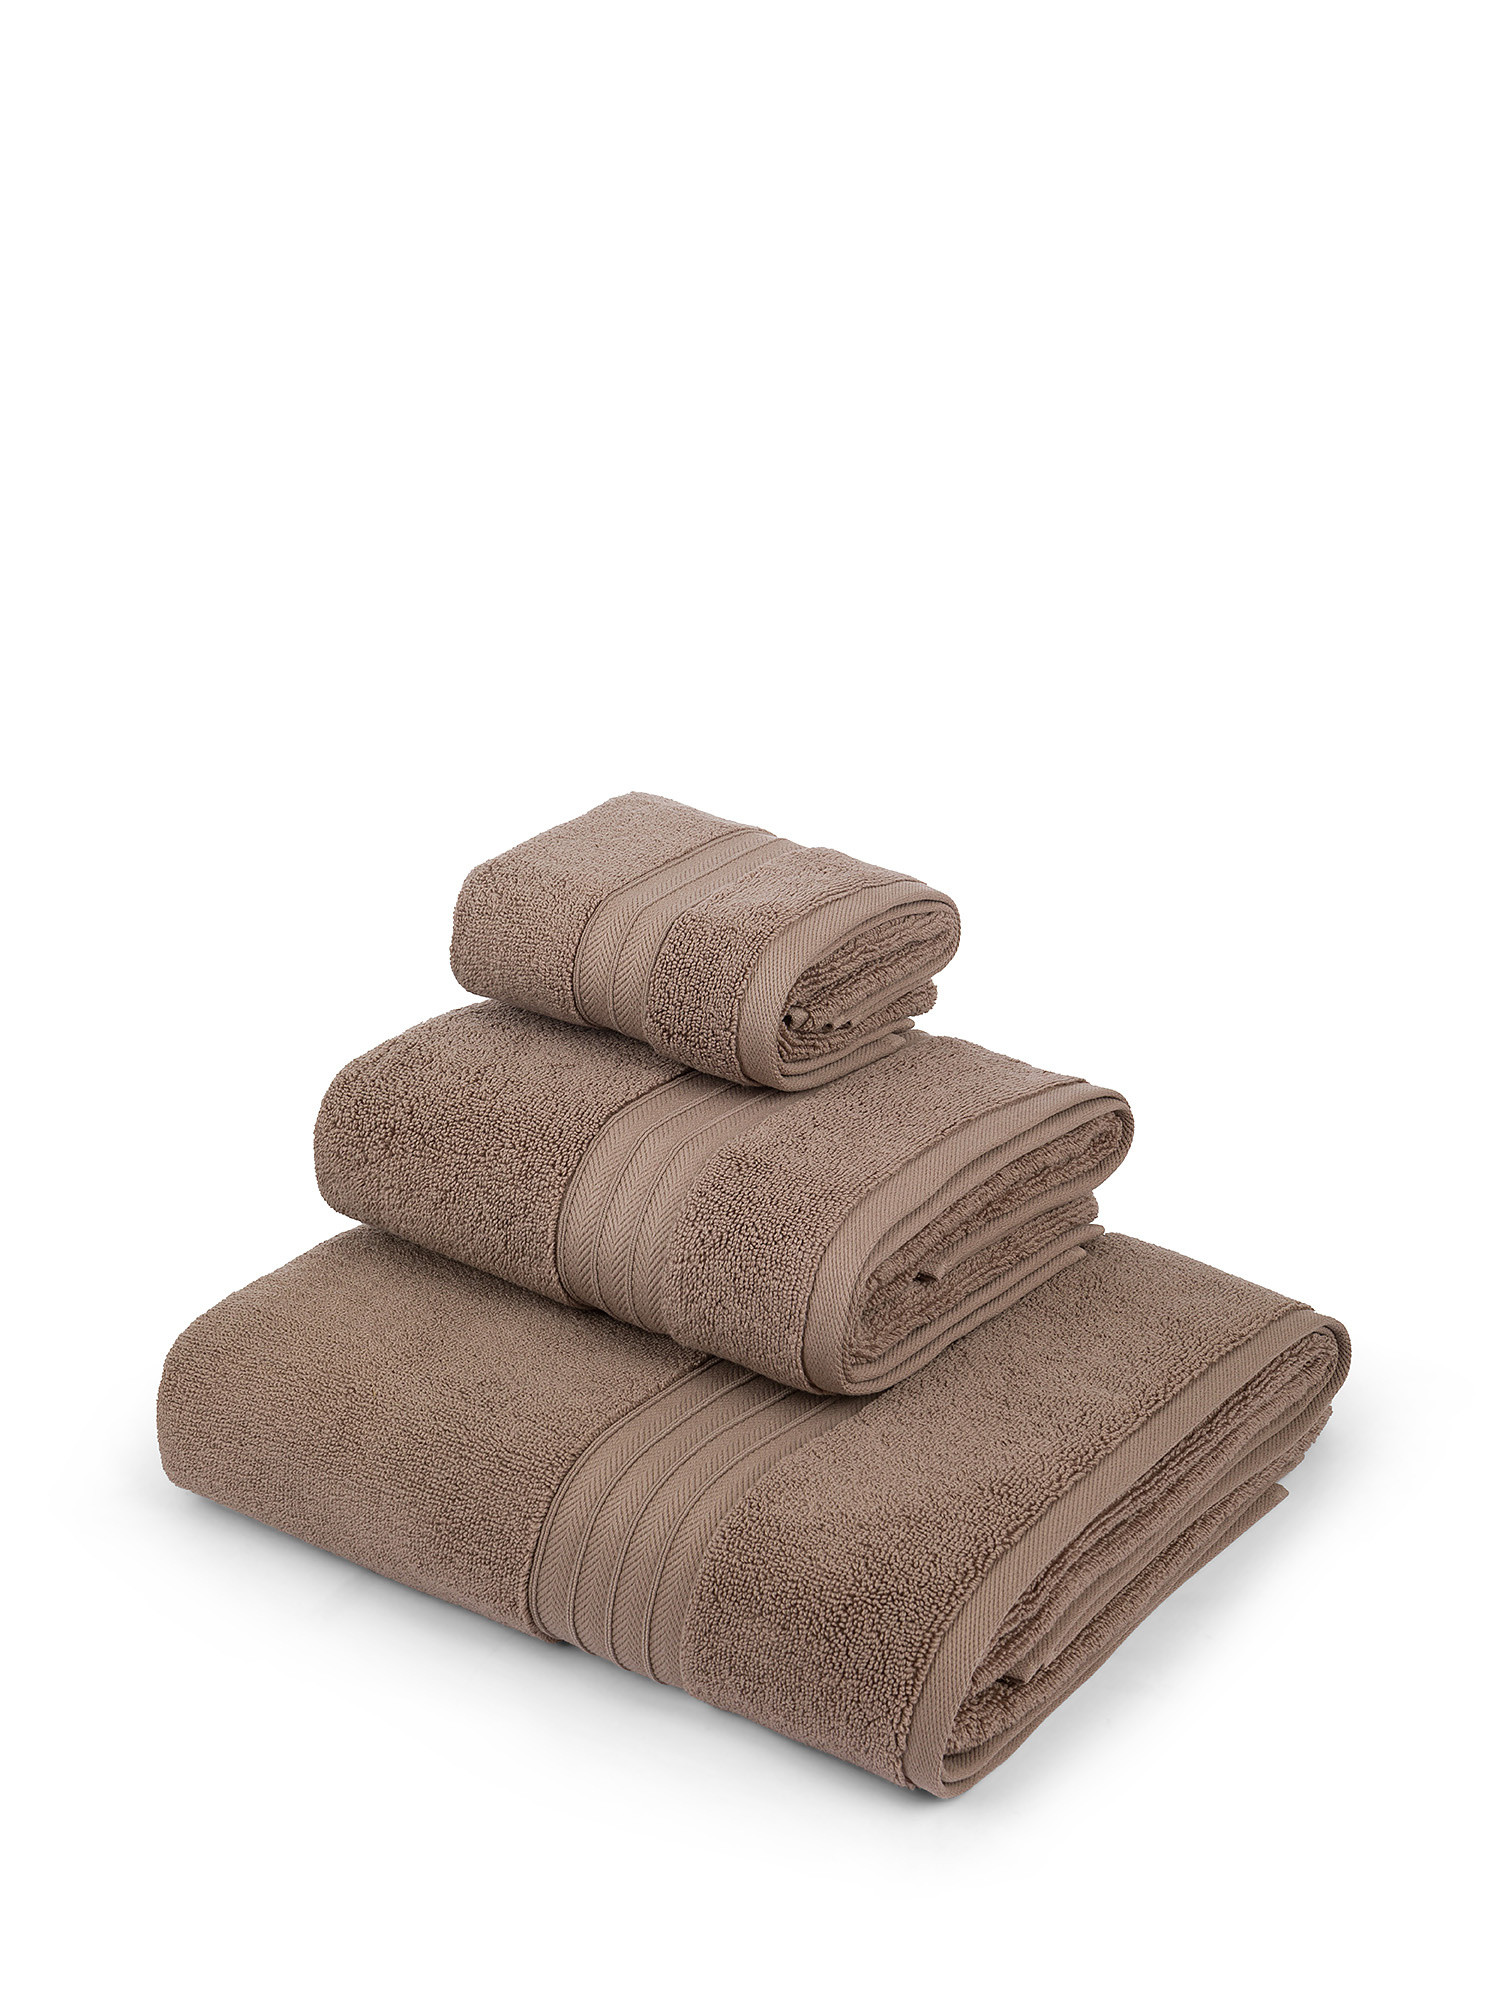 Thermae premium quality cotton towel, Brown, large image number 0